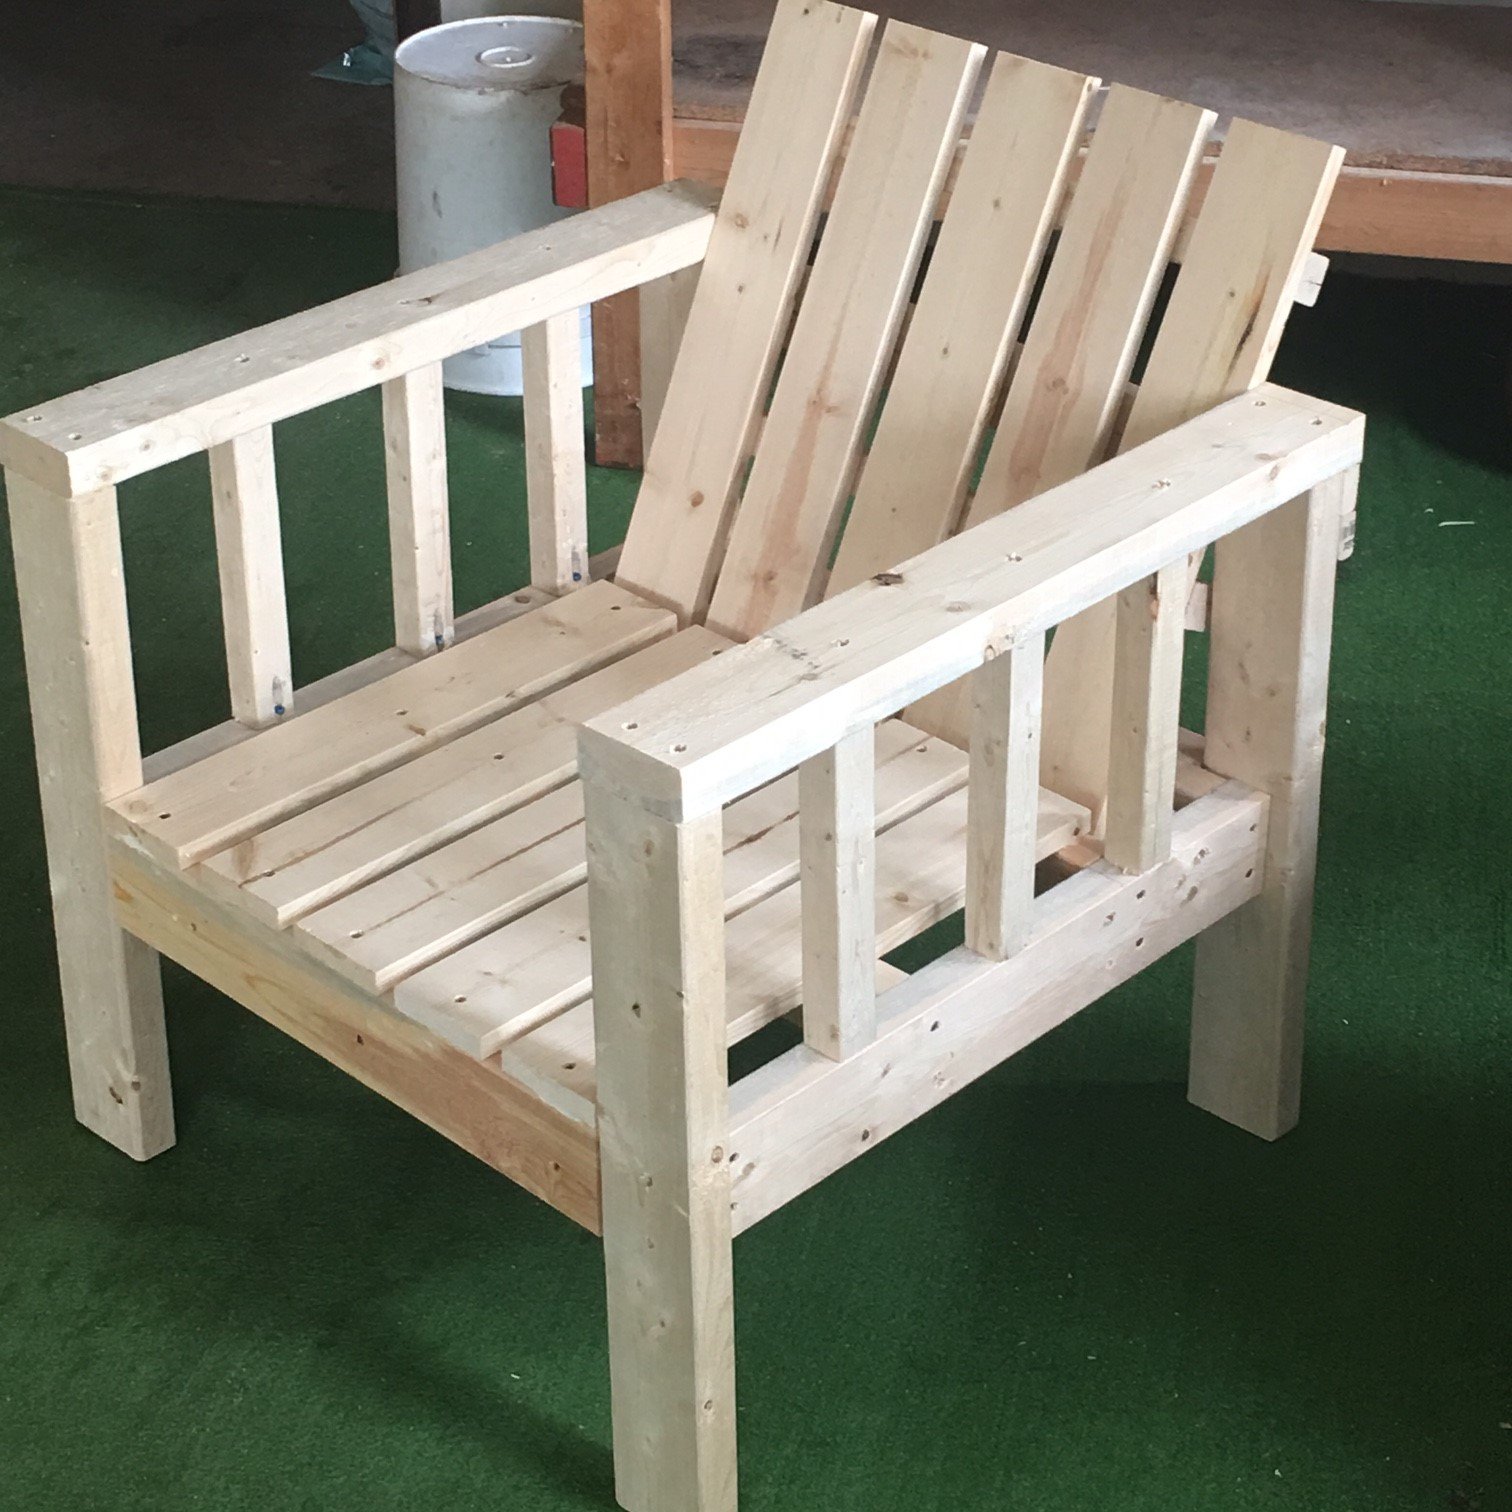 My Simple Outdoor Lounge Chair with 2x4 modification | Ana White